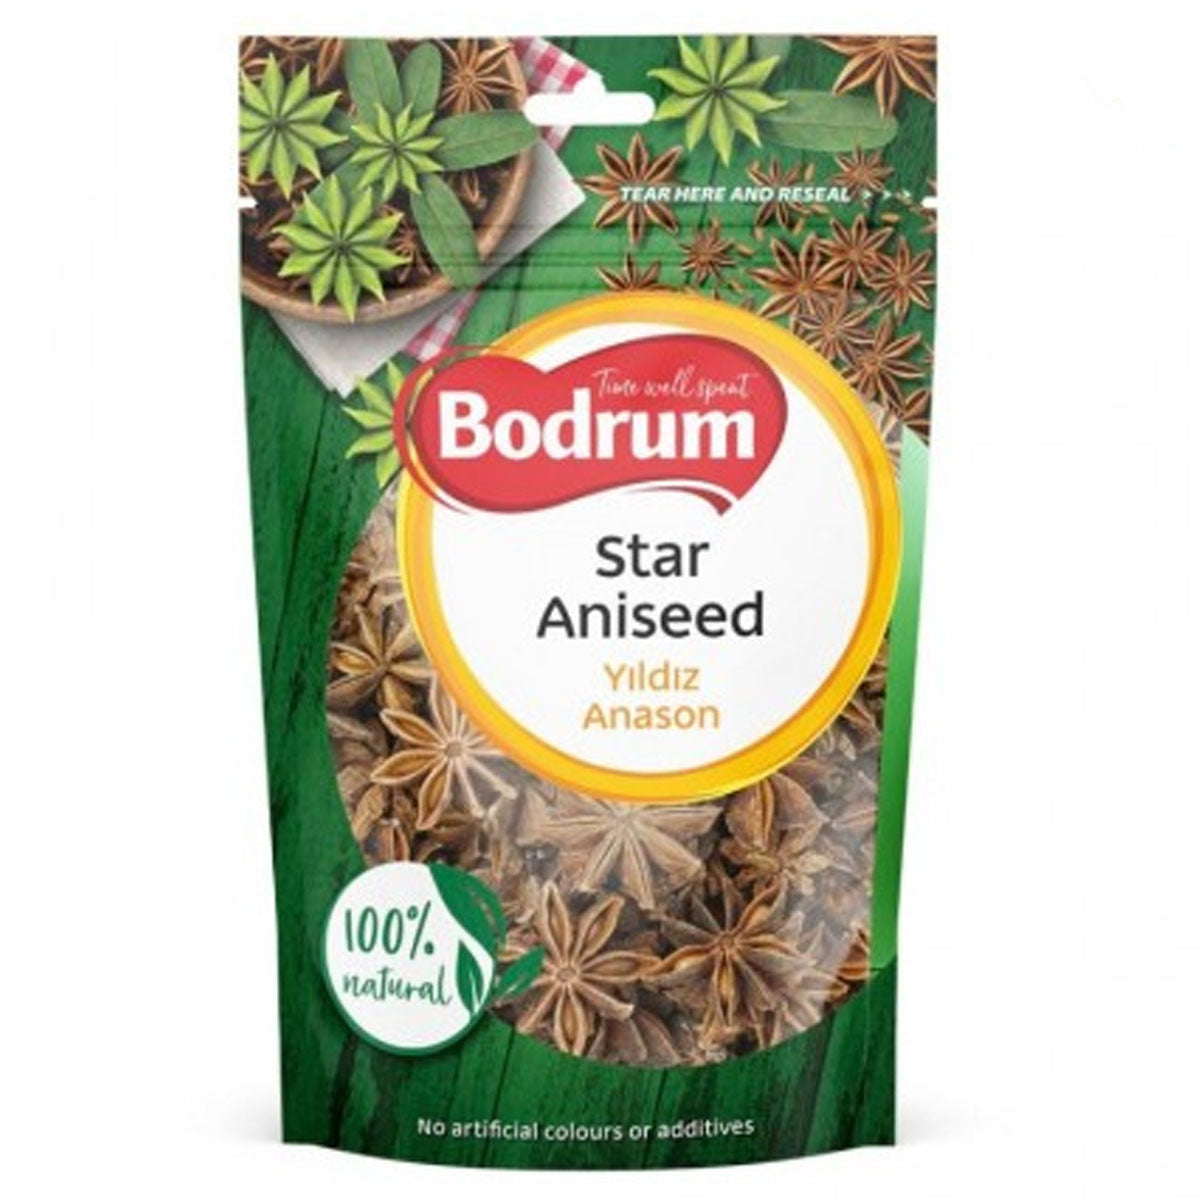 Bodrum - Star Aniseed - 50g star anise seeds.